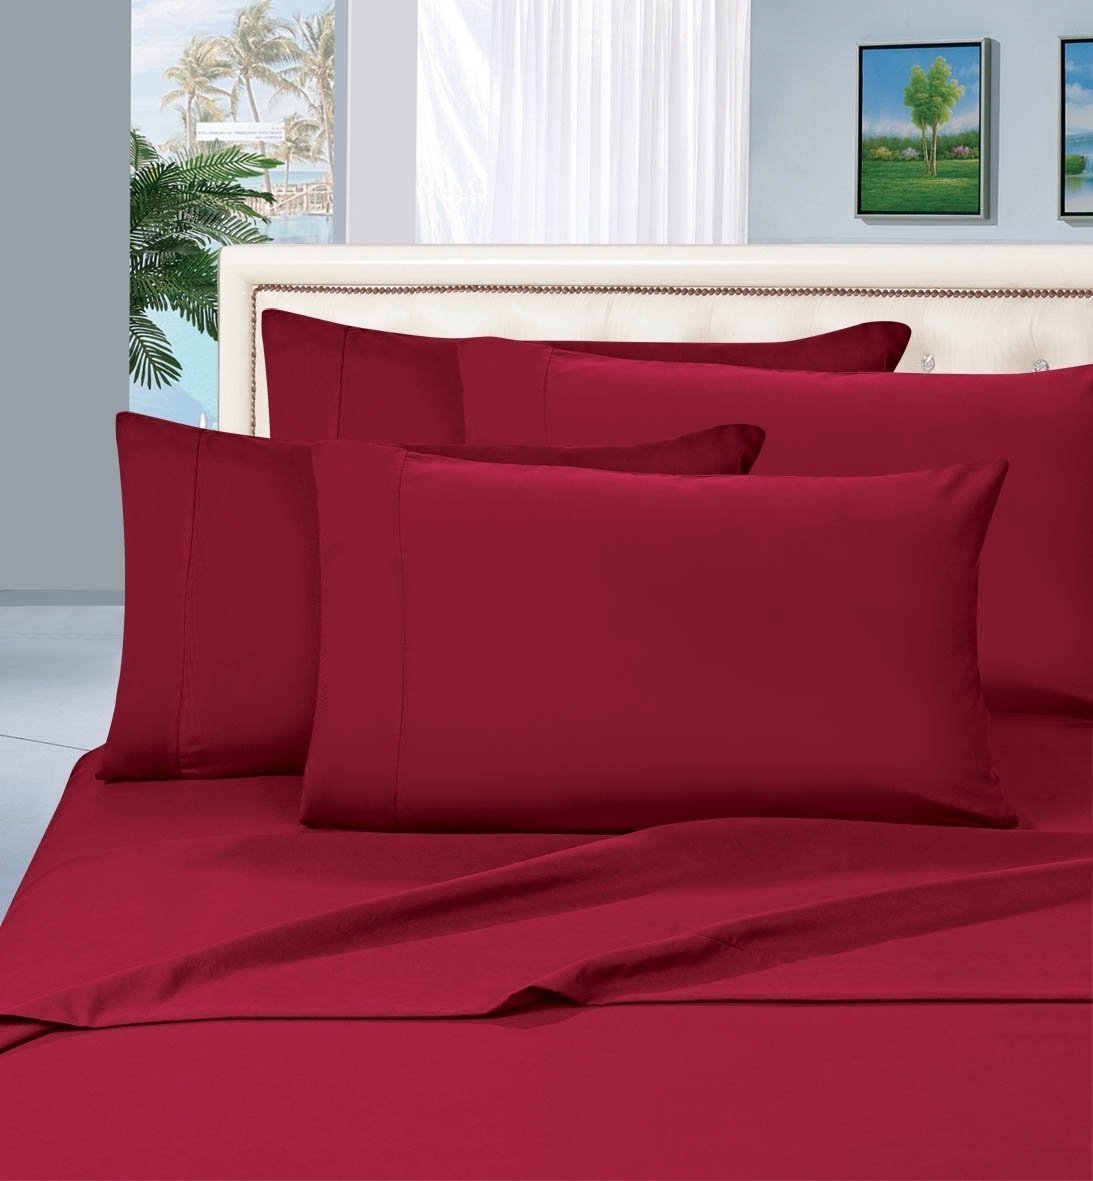 Elegant Comfort 1500 Series Wrinkle Resistant Egyptian Quality Hypoallergenic Ultra Soft Luxury 4-piece Bed Sheet Set, Queen, Burgundy